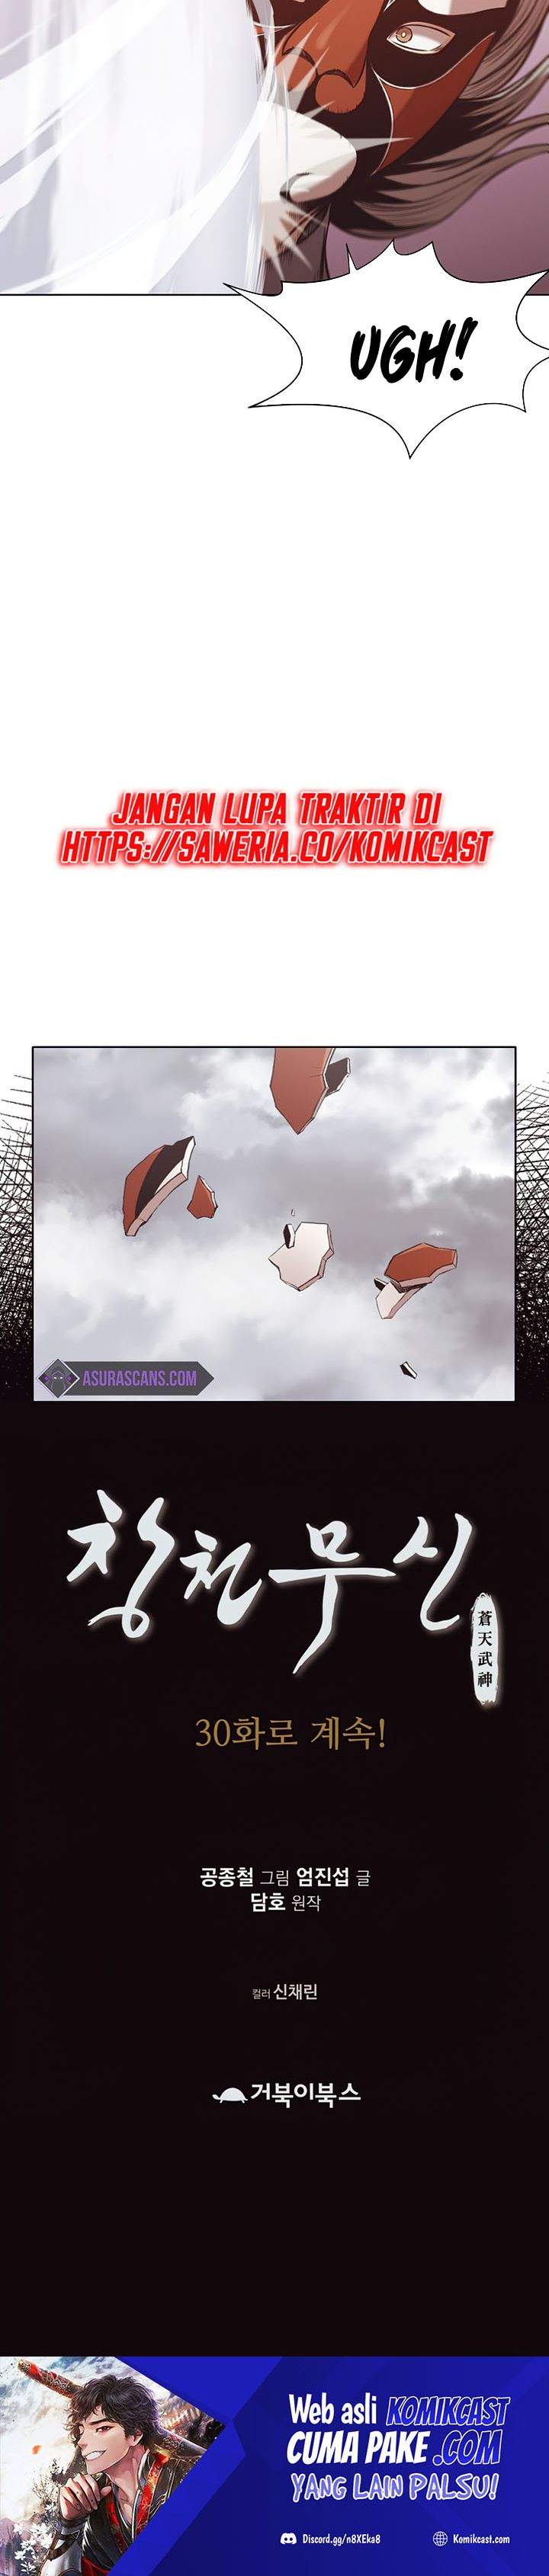 Heavenly Martial God Chapter 29